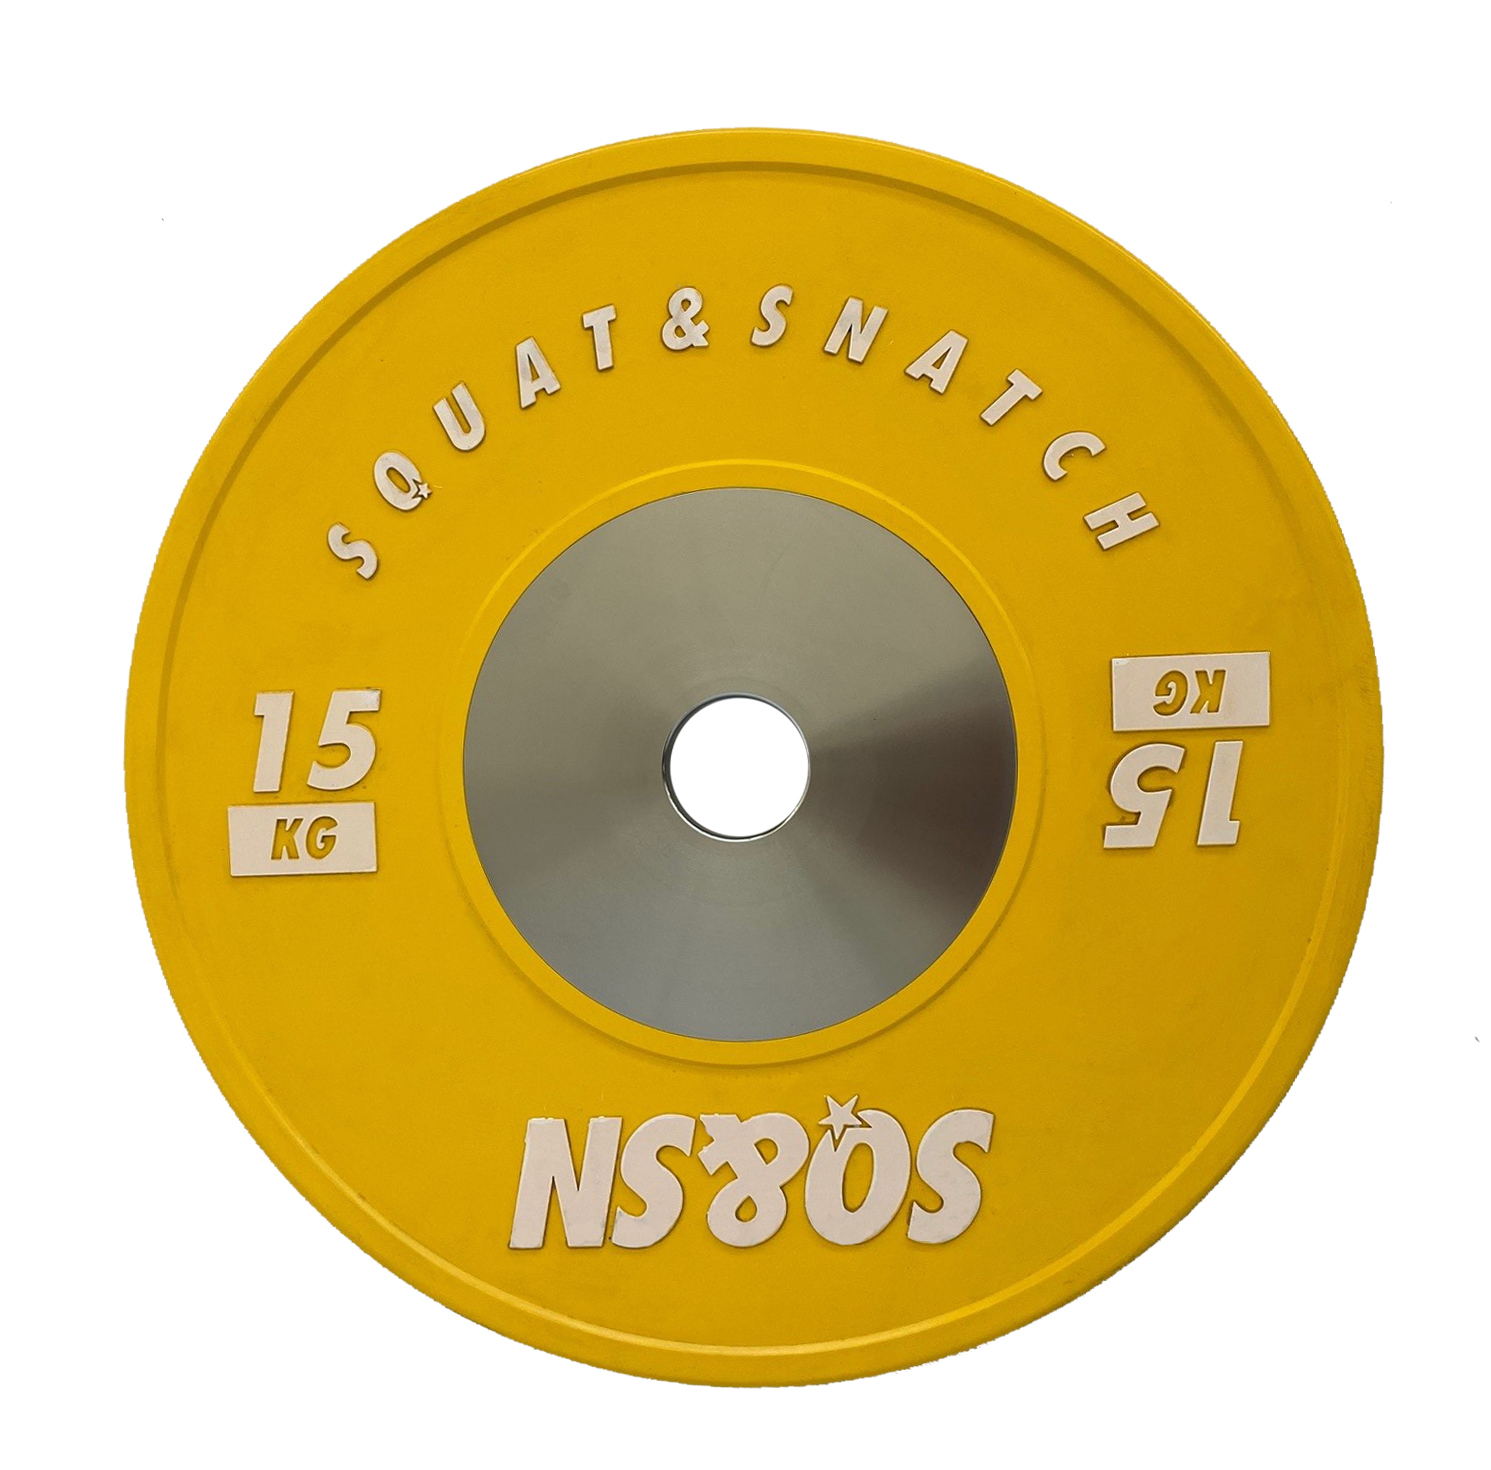 SQ&SN Competition Bumper Plate 15 kg Yellow - Demo thumbnail